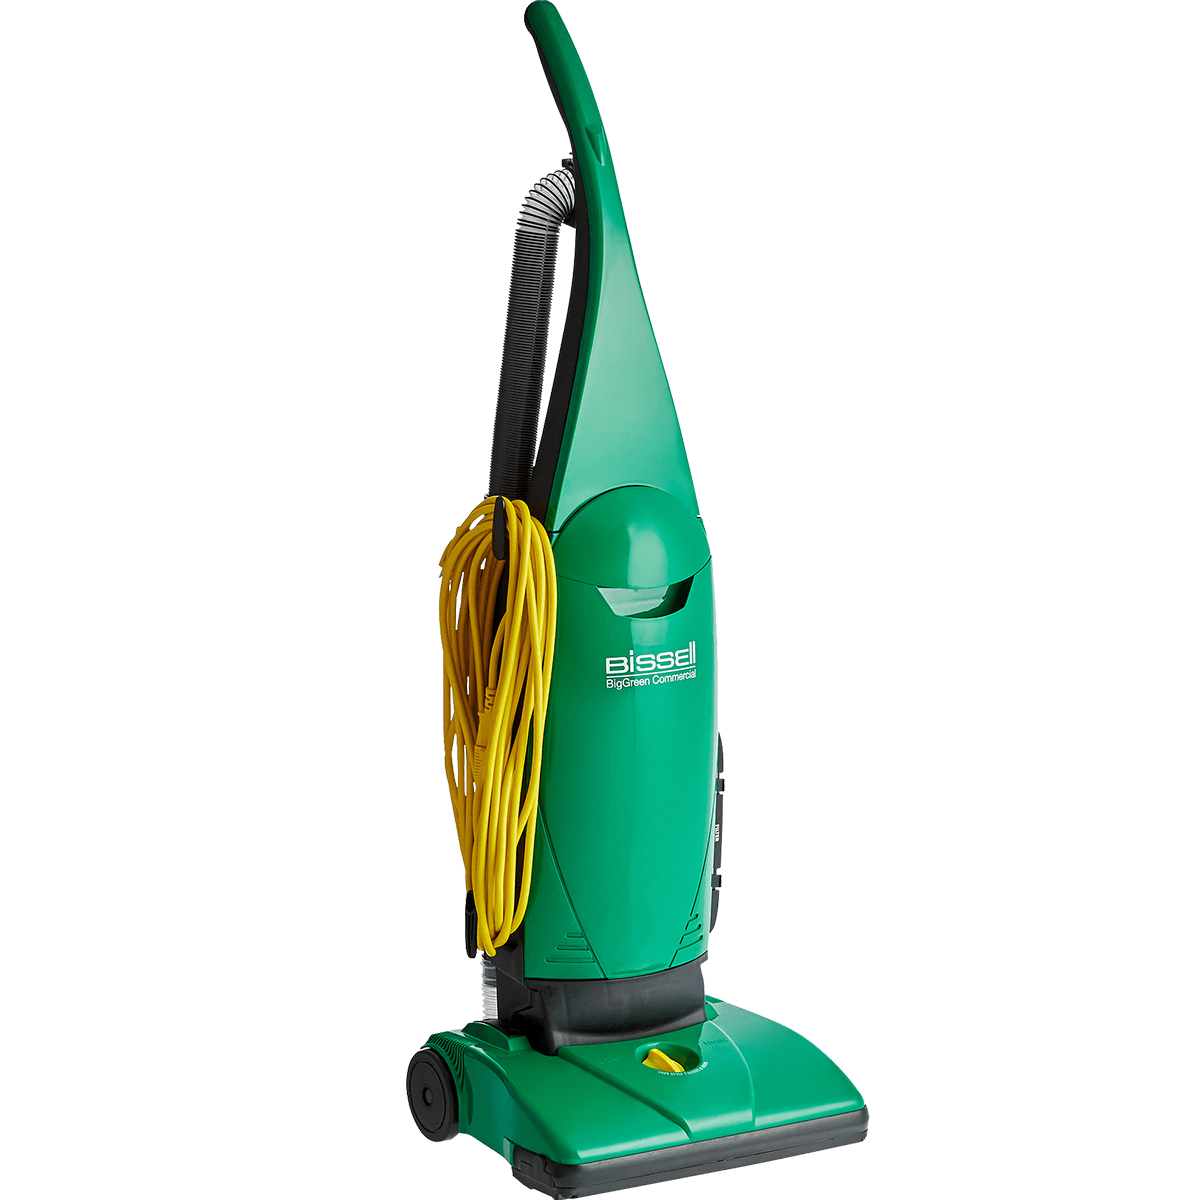 Bissell BigGreen ProBag 13-in Upright Commercial Vacuum